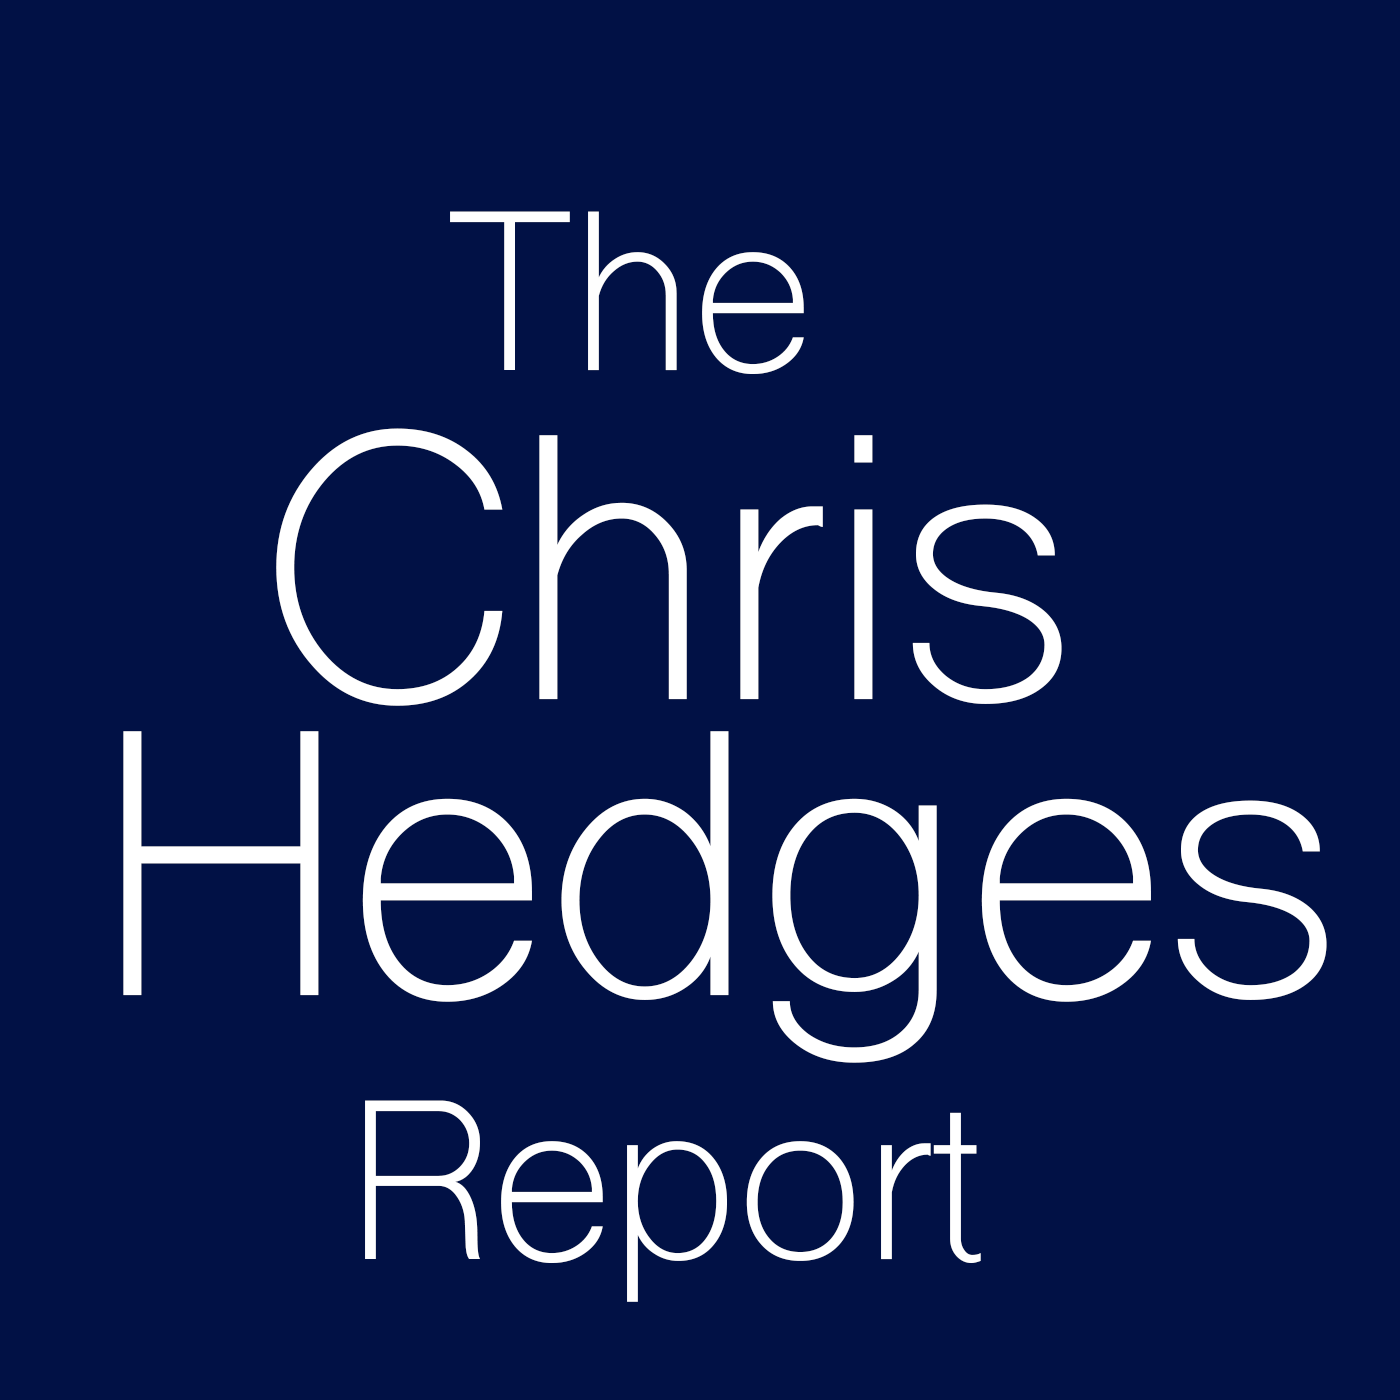 The Chris Hedges Report with Miko Peled, the son of an Israeli general who served in the Special Forces in the Israeli army, on the racist indoctrination and militarization of Israeli society.